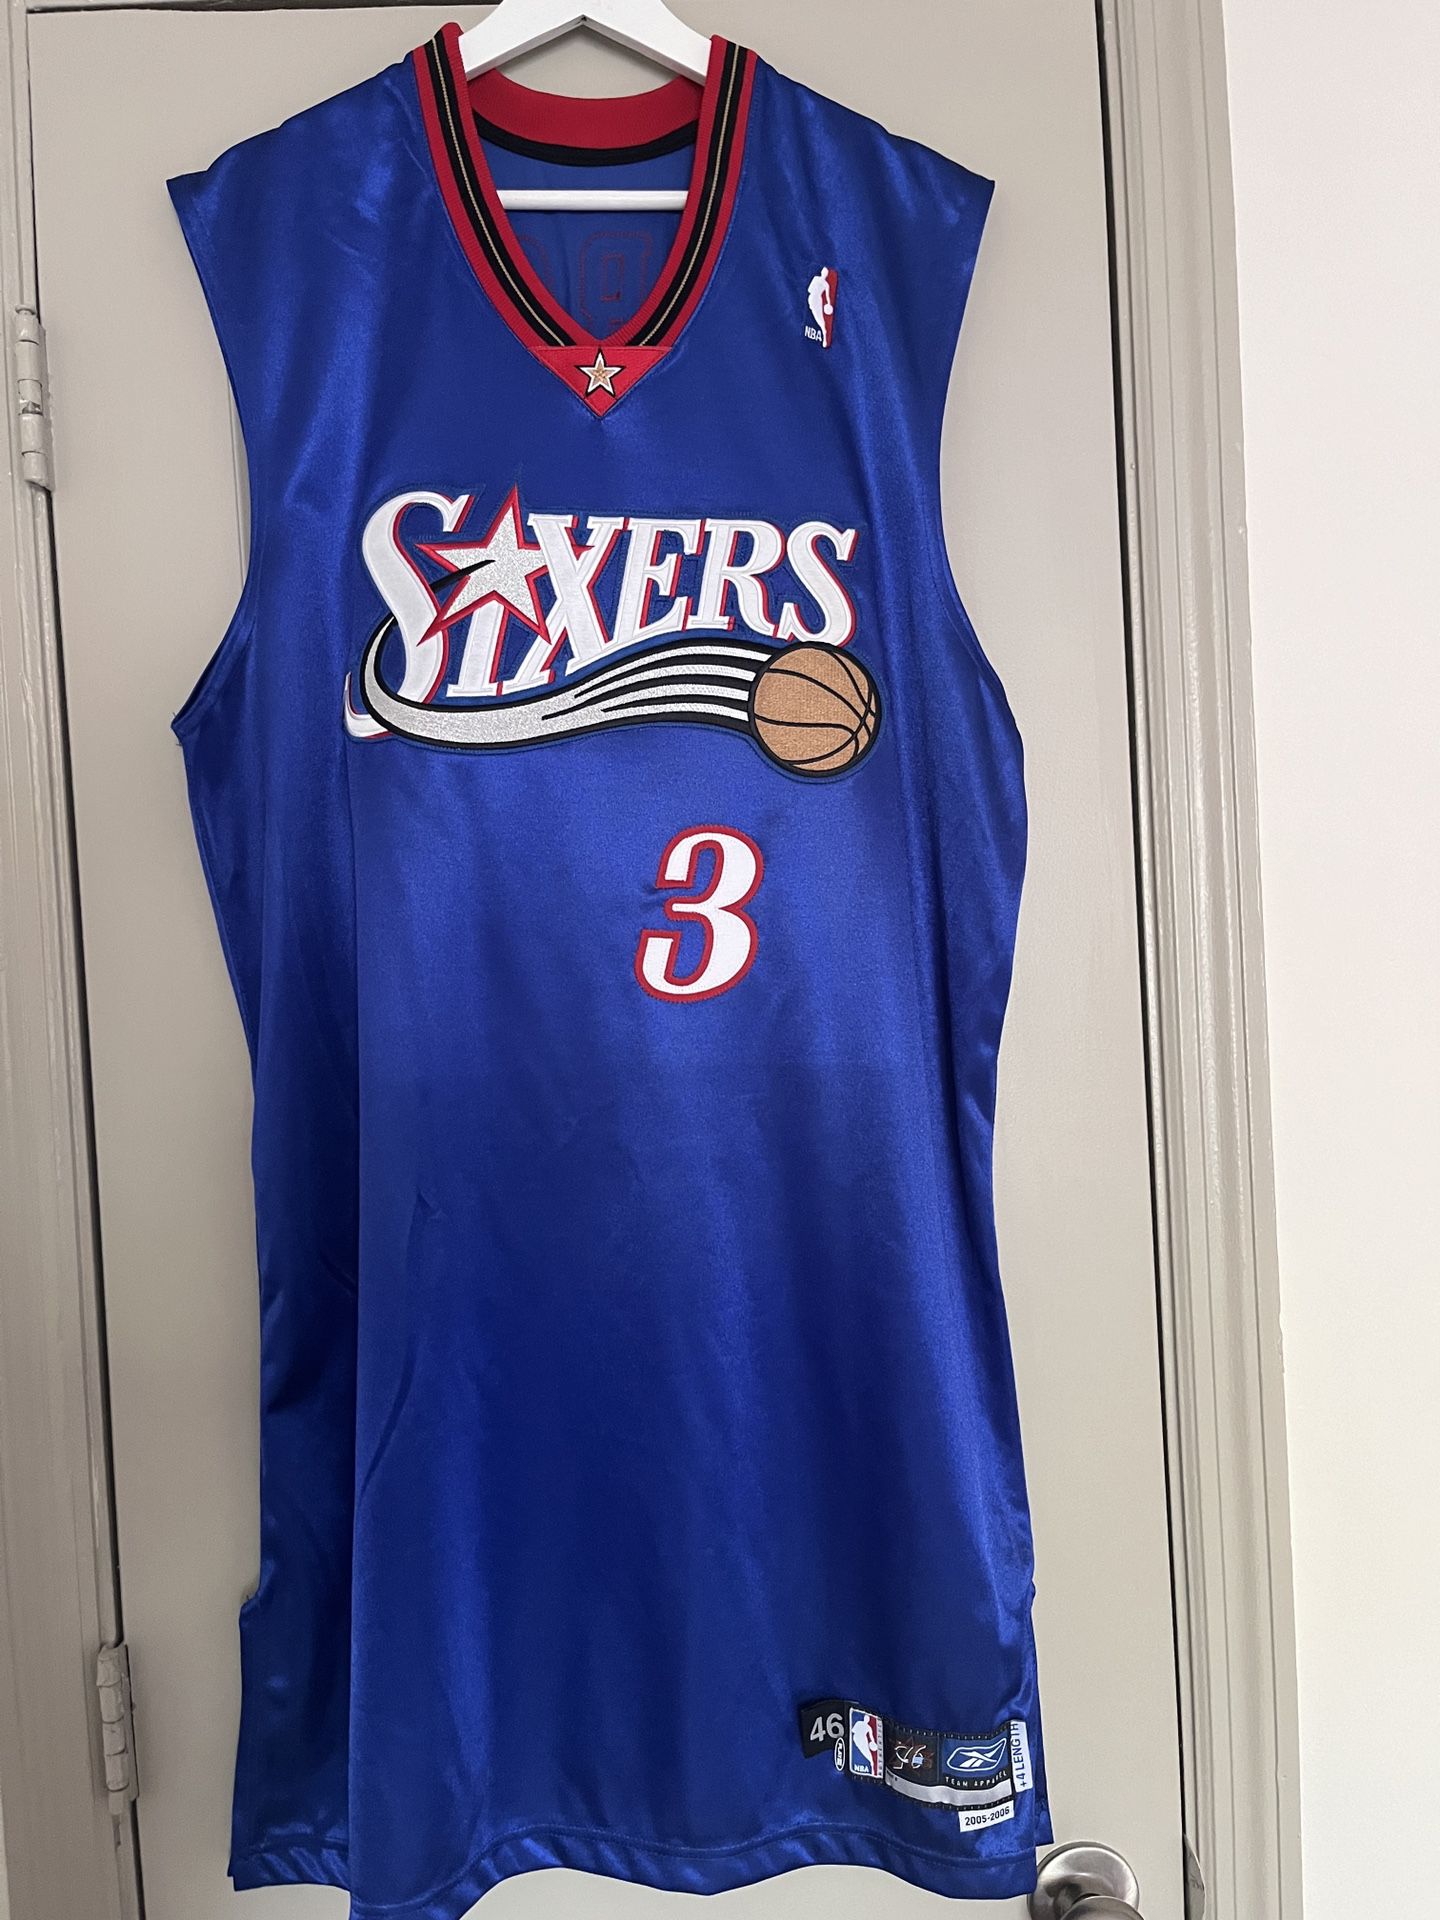 Iverson team issued jersey